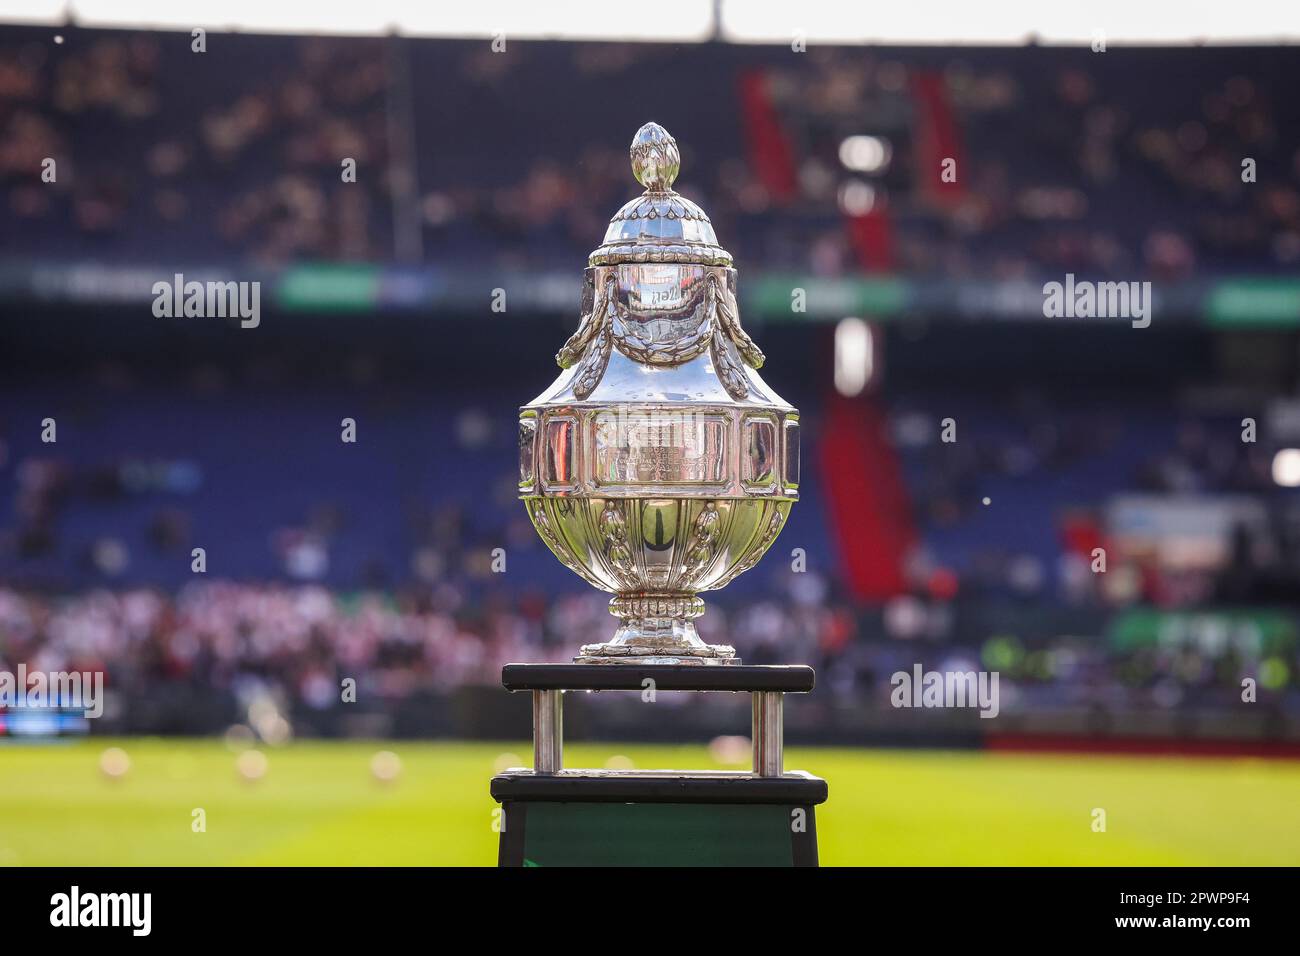 KNVB] Time and dates for KNVB Cup semi finals : r/Eredivisie